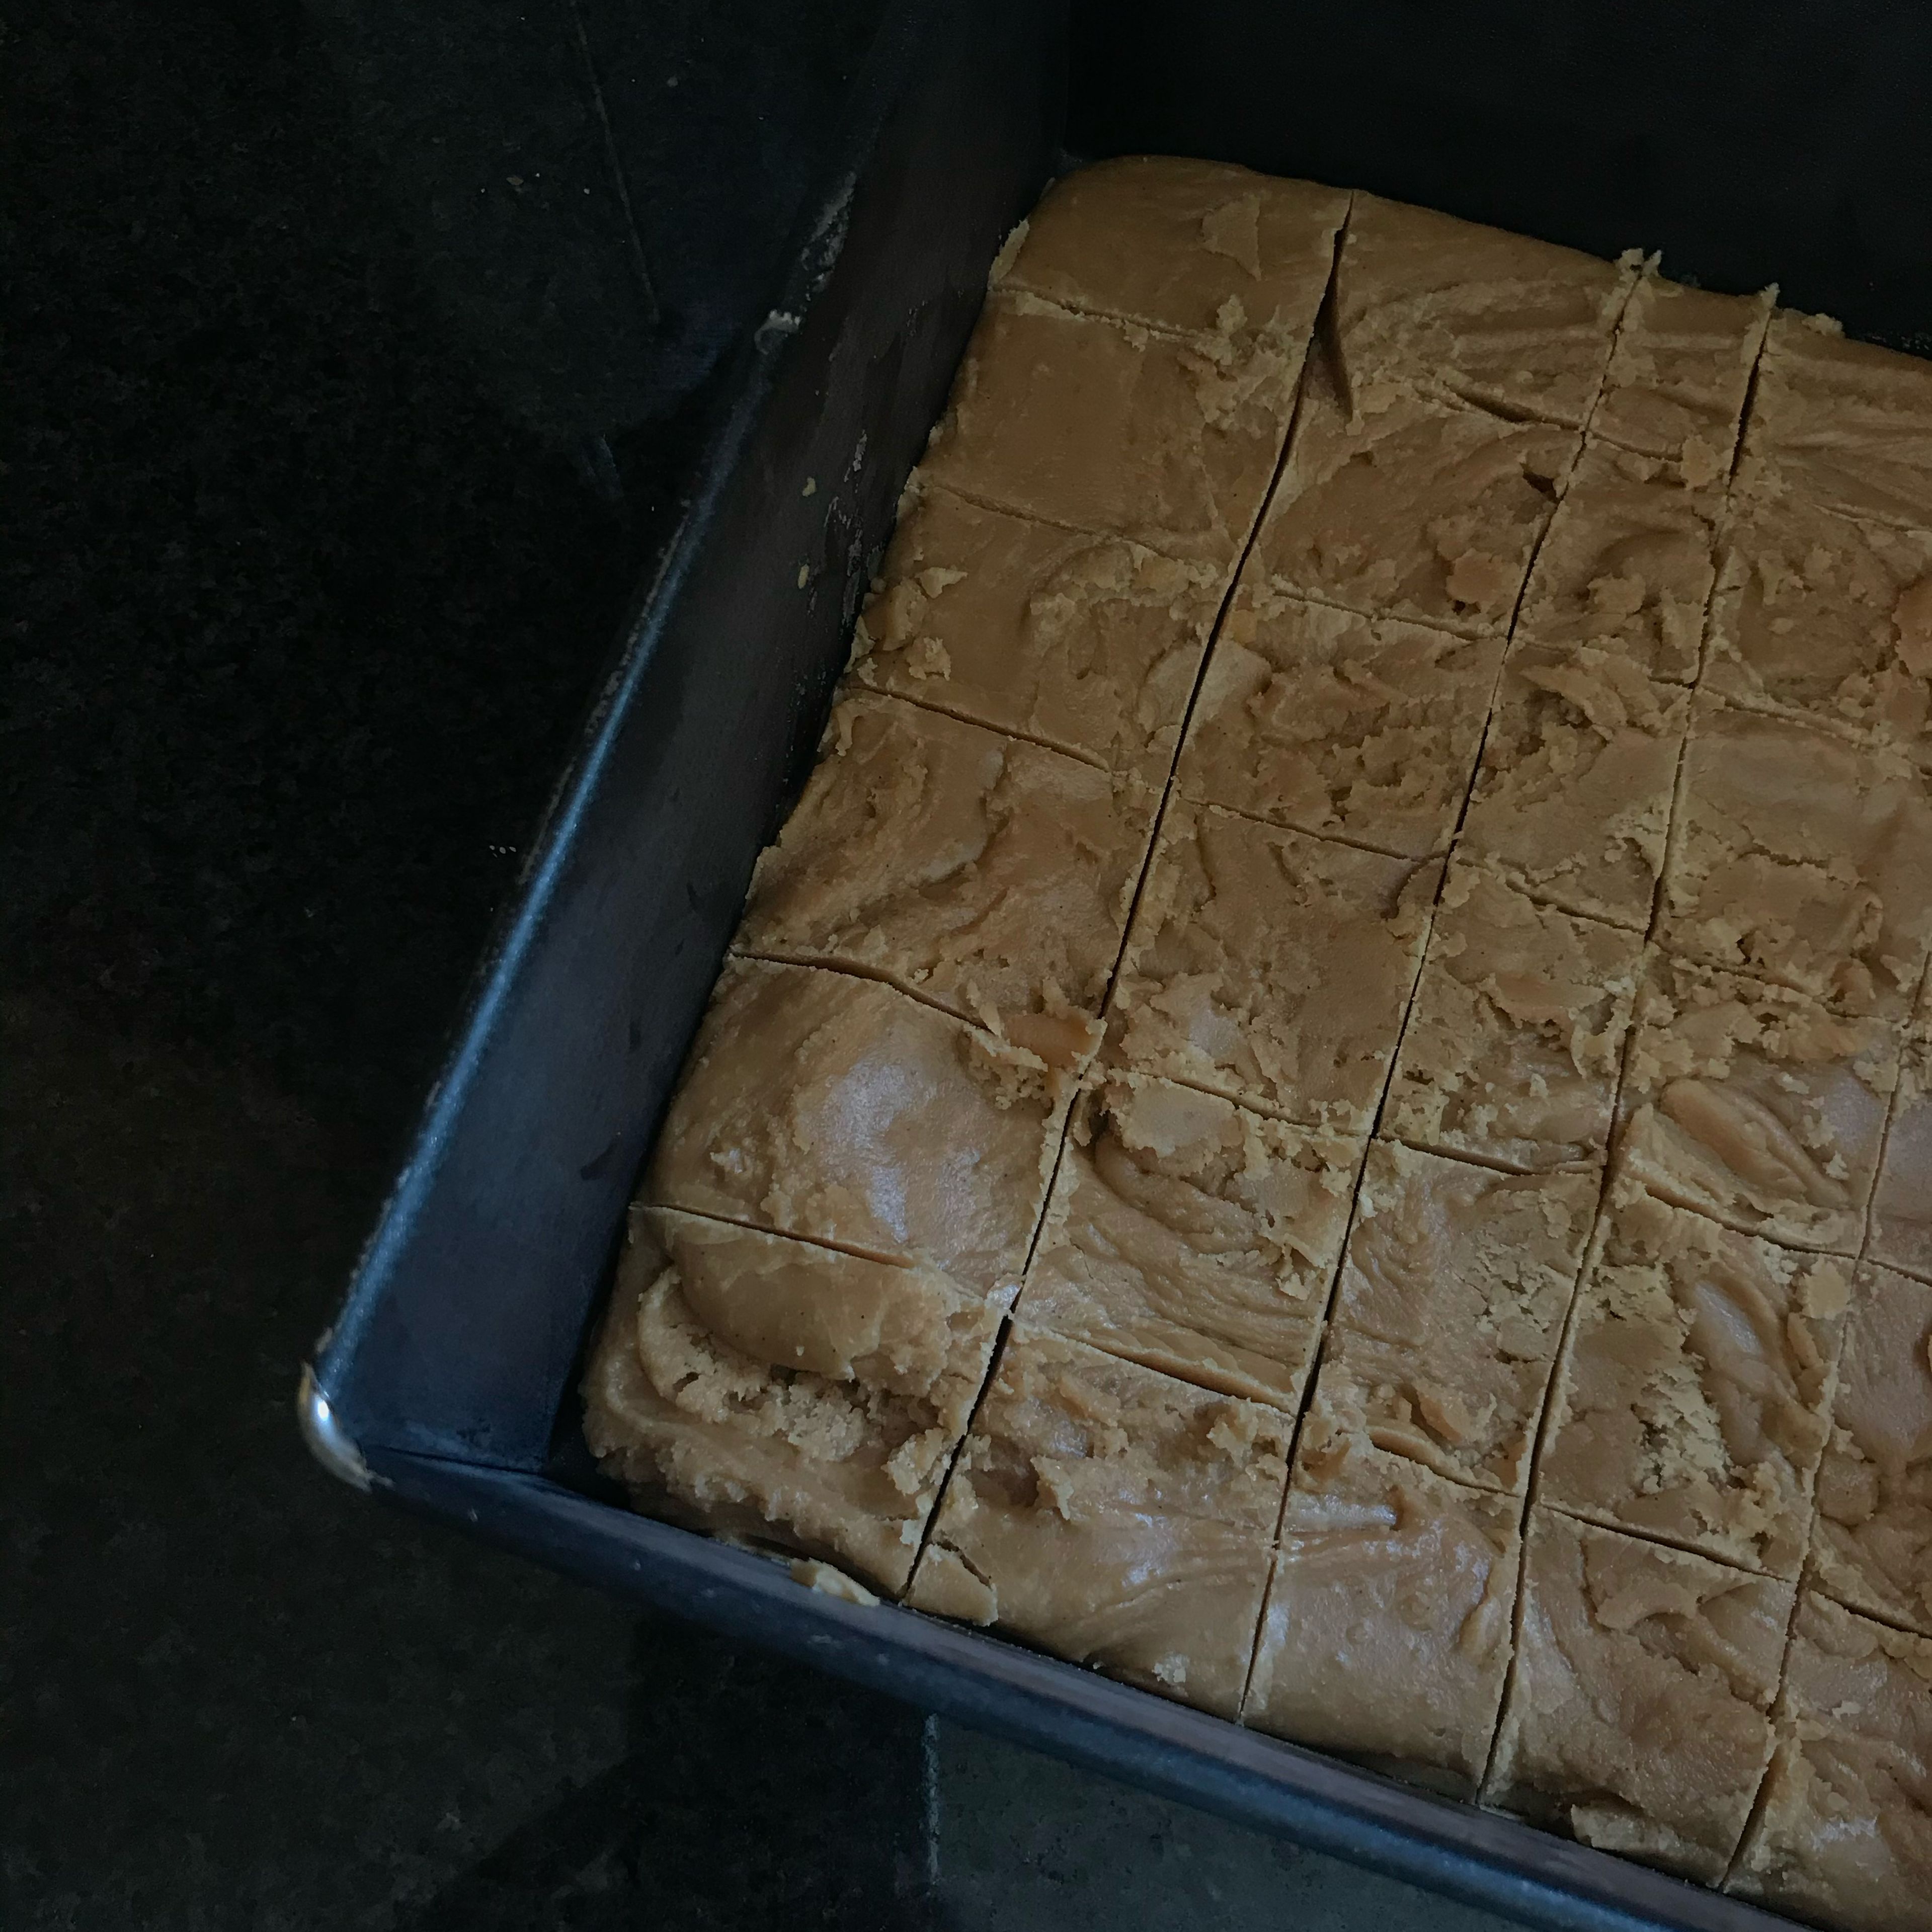 Pour the fudge into a square or circular cake tin or small baking tray. Smooth out with a knife and then after 10 mins, score into square/pieces with a knife so it is easy to break when it has set fully.